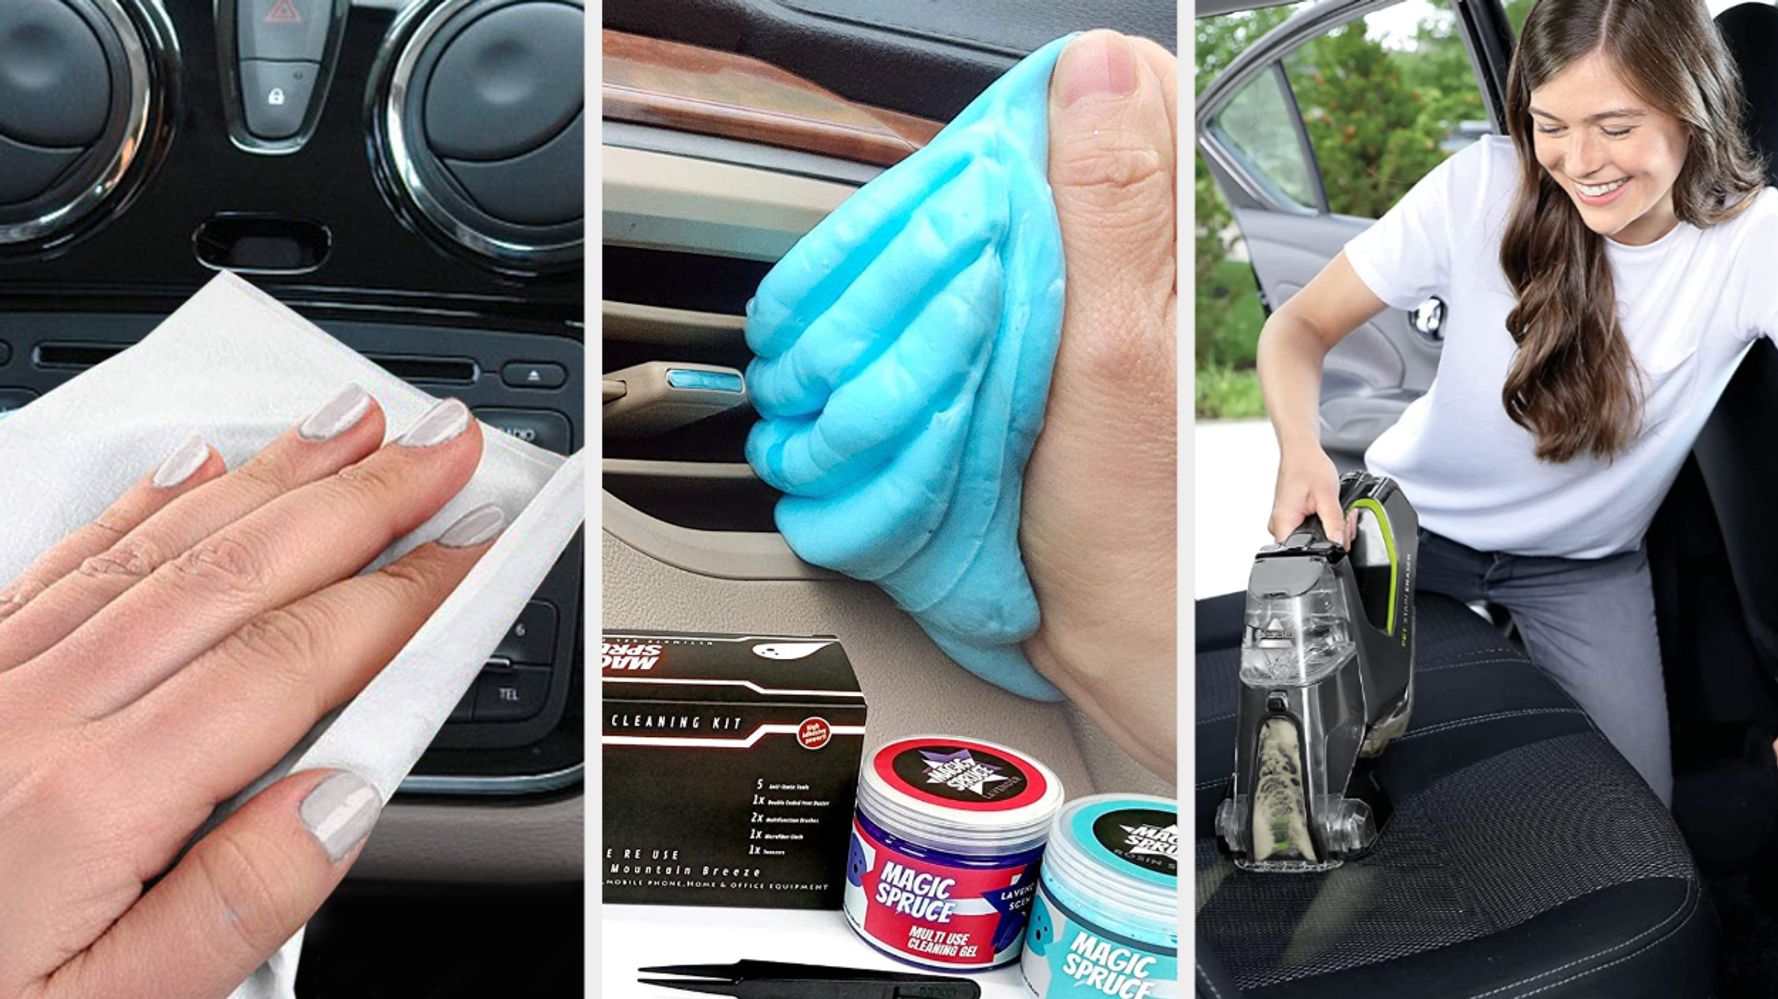 Messy Car? Our Car Cleaning Tips Will Keep it Clean! - A Girls Guide to Cars